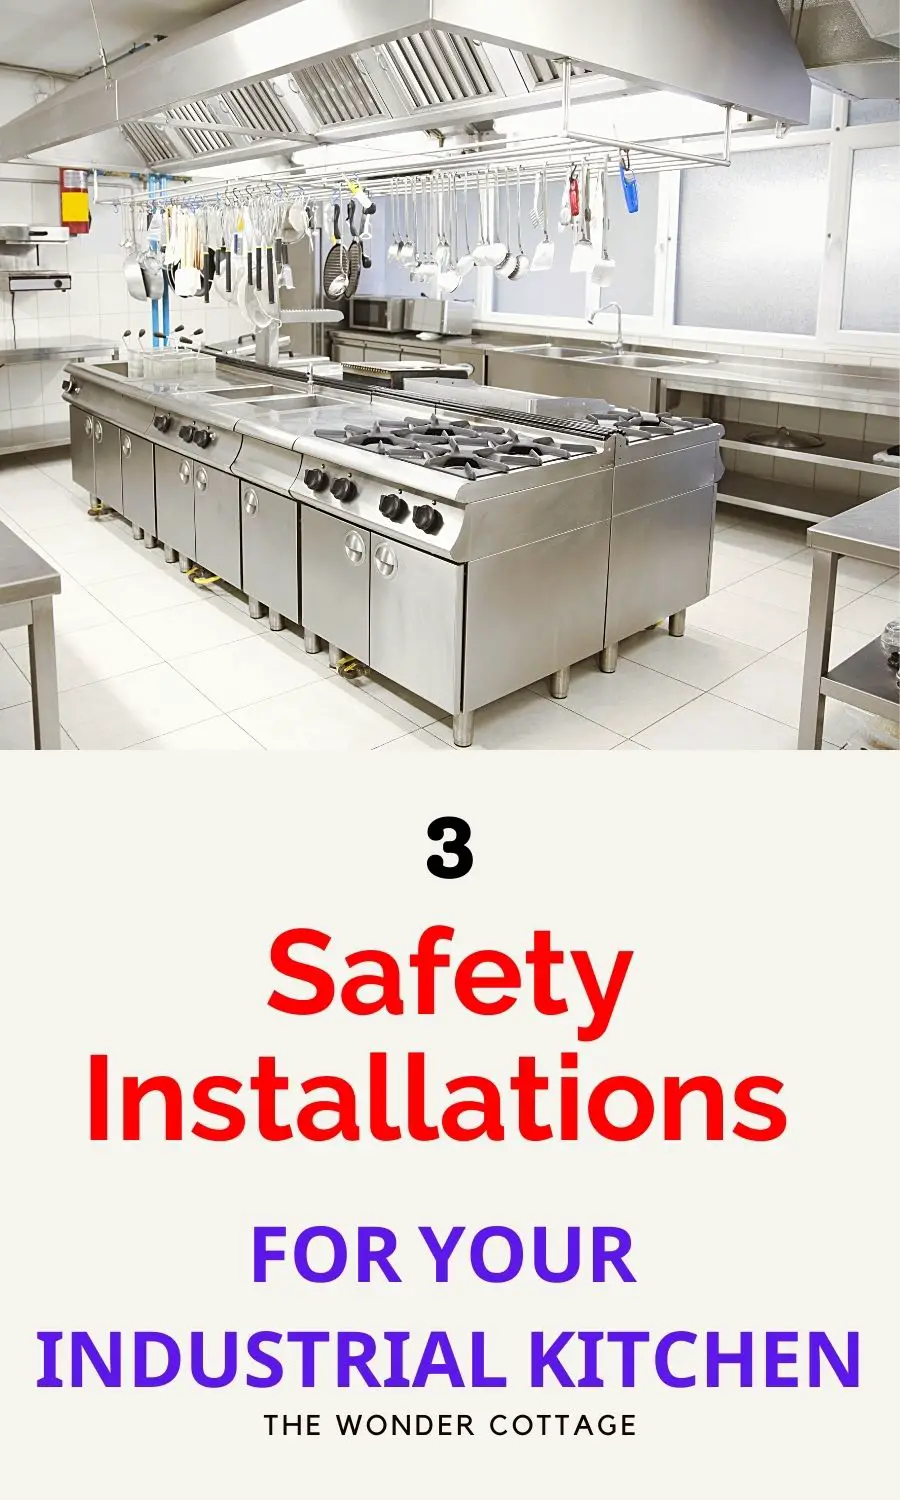 How You Can Make Your Industrial Kitchen Safer to Use